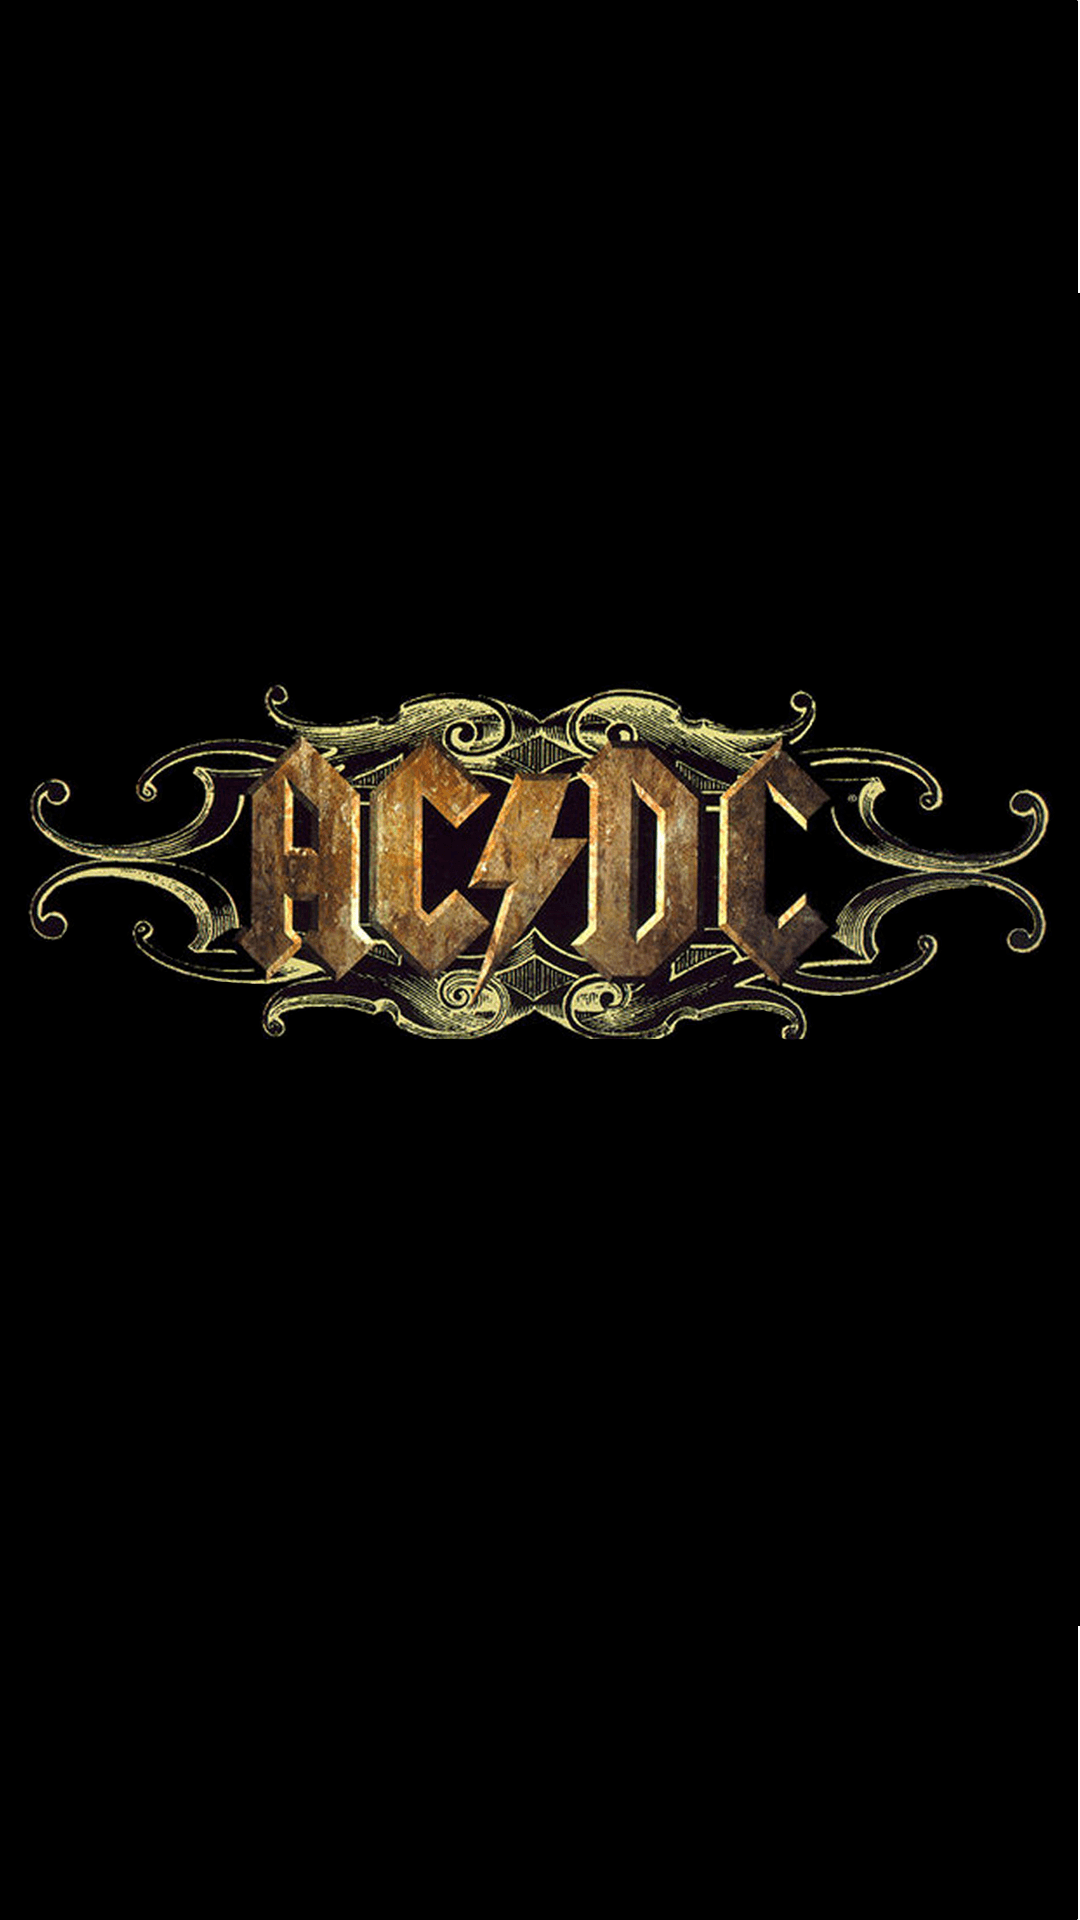 ACDC Rock Logo Android Wallpaper free download